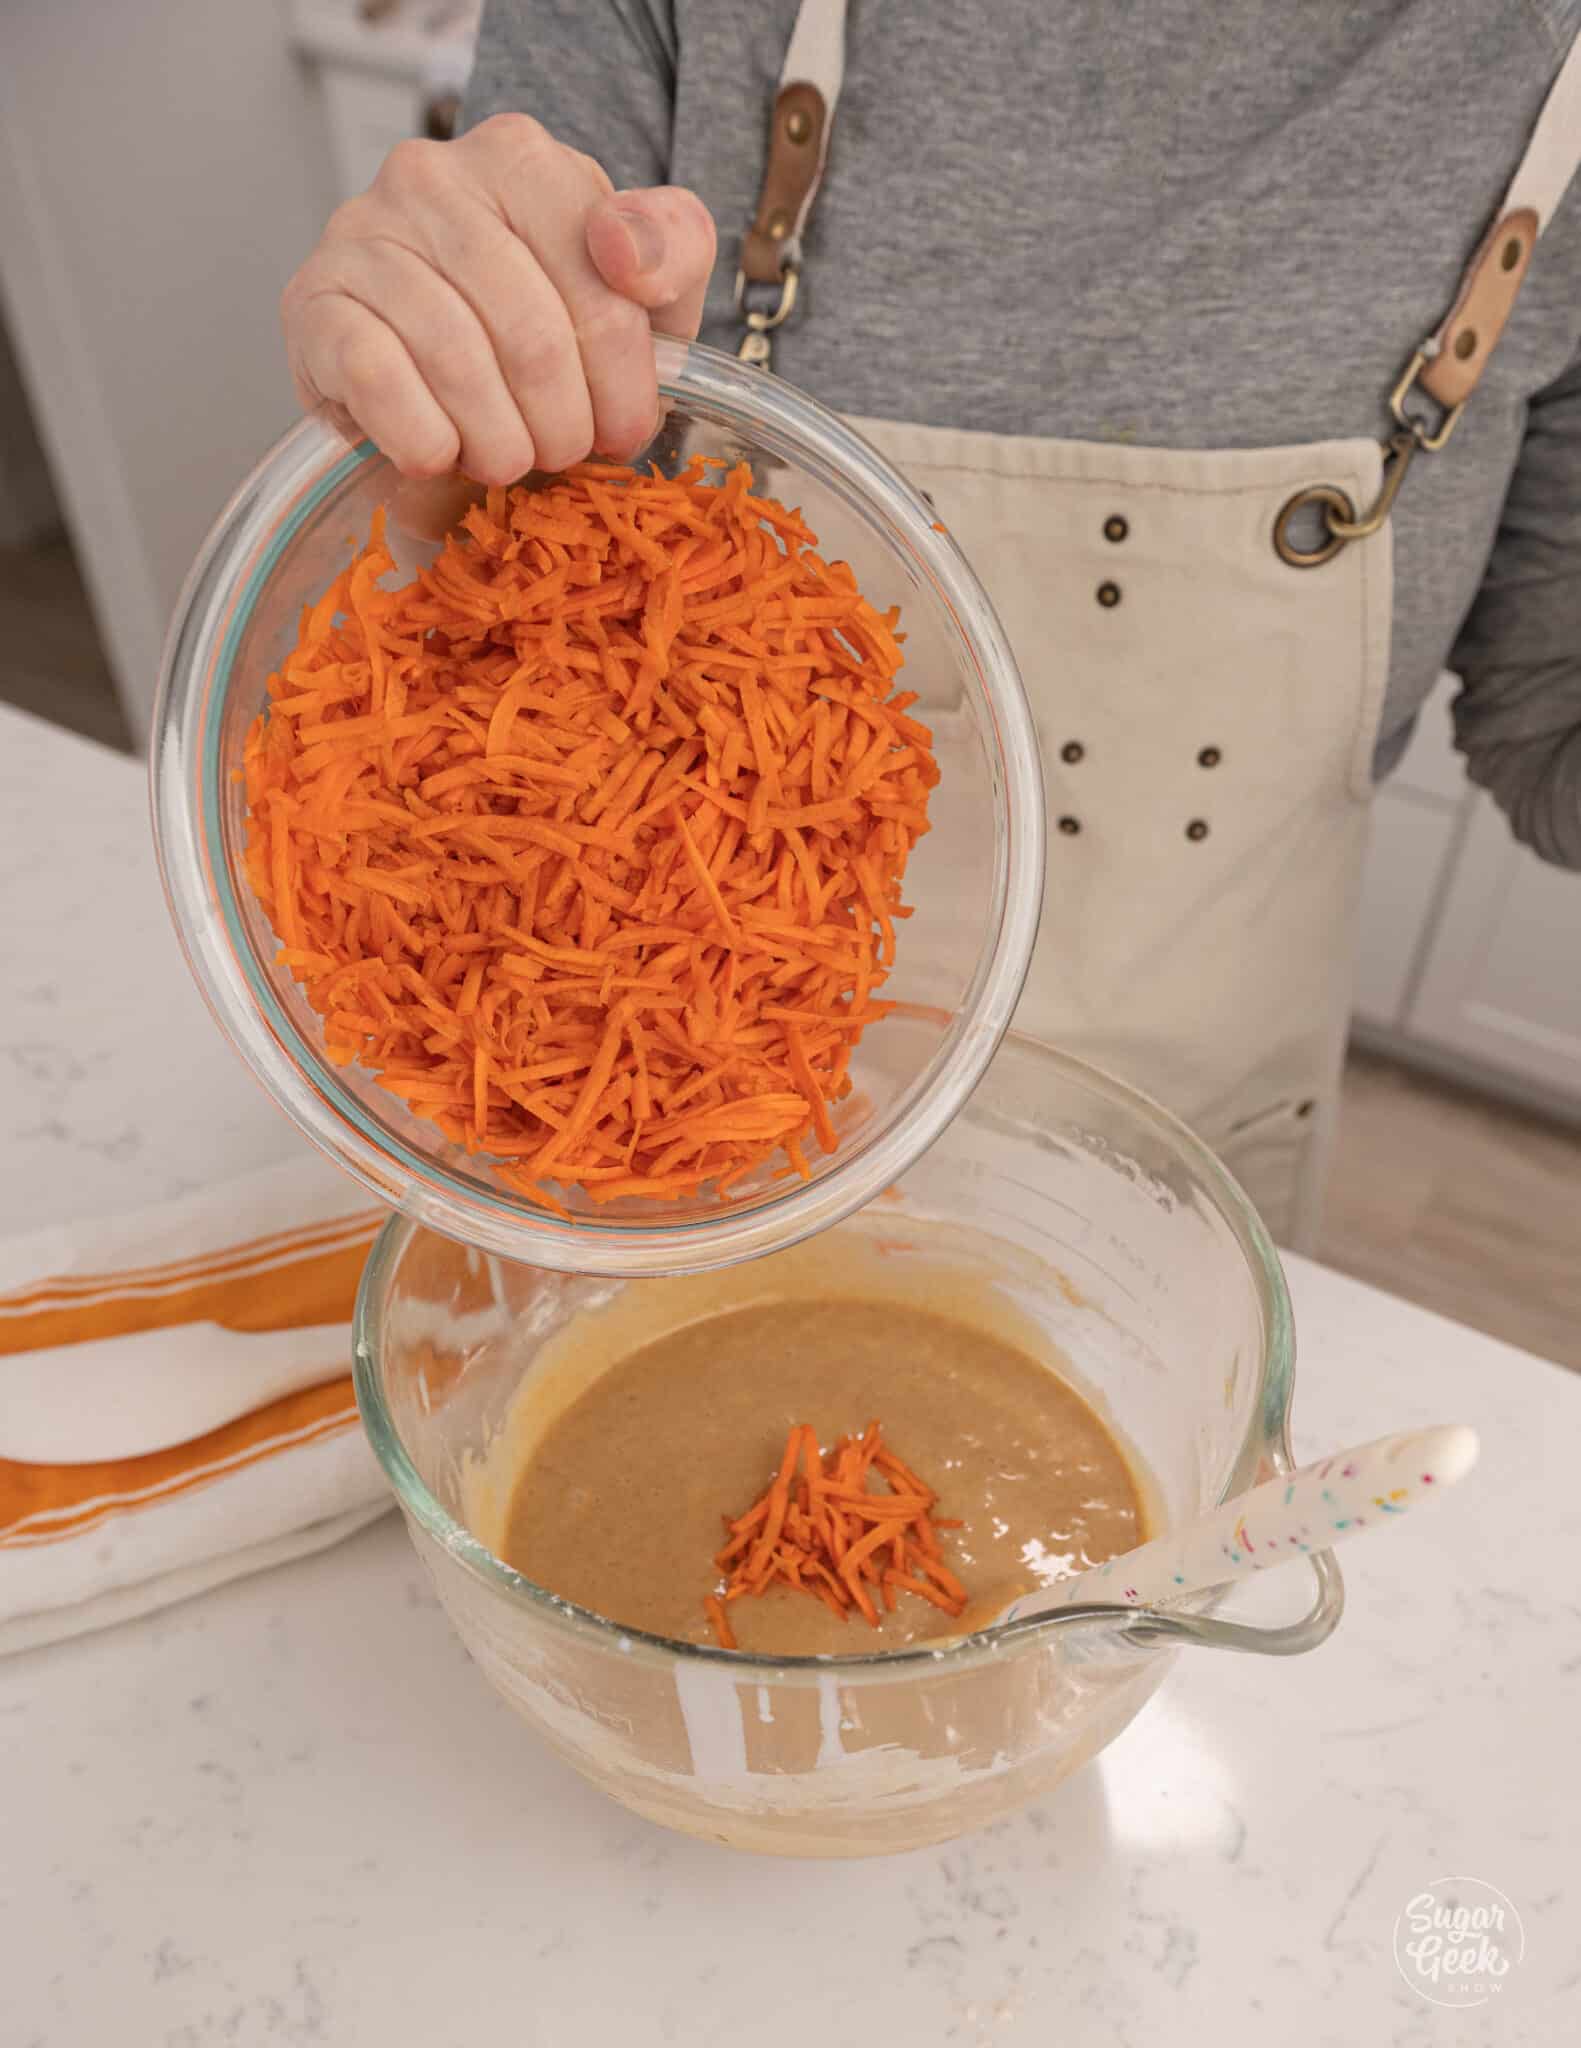 Hand adding a bowl of carrots to batter